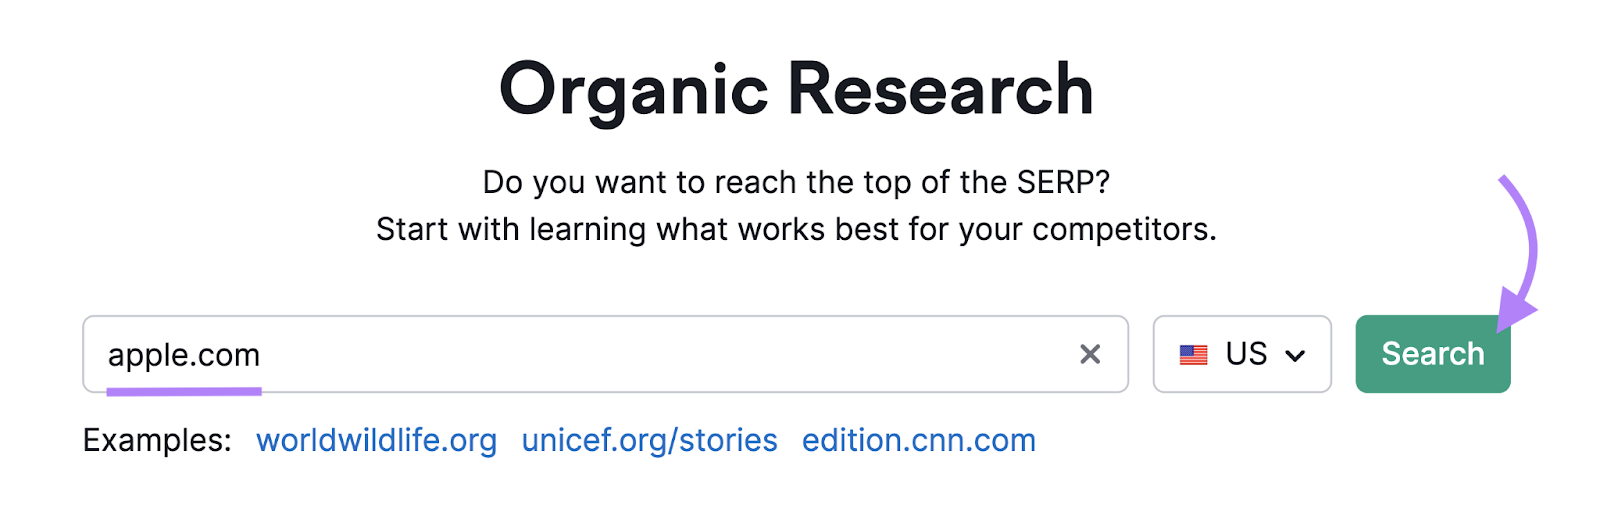 search for apple.com in organic research tool